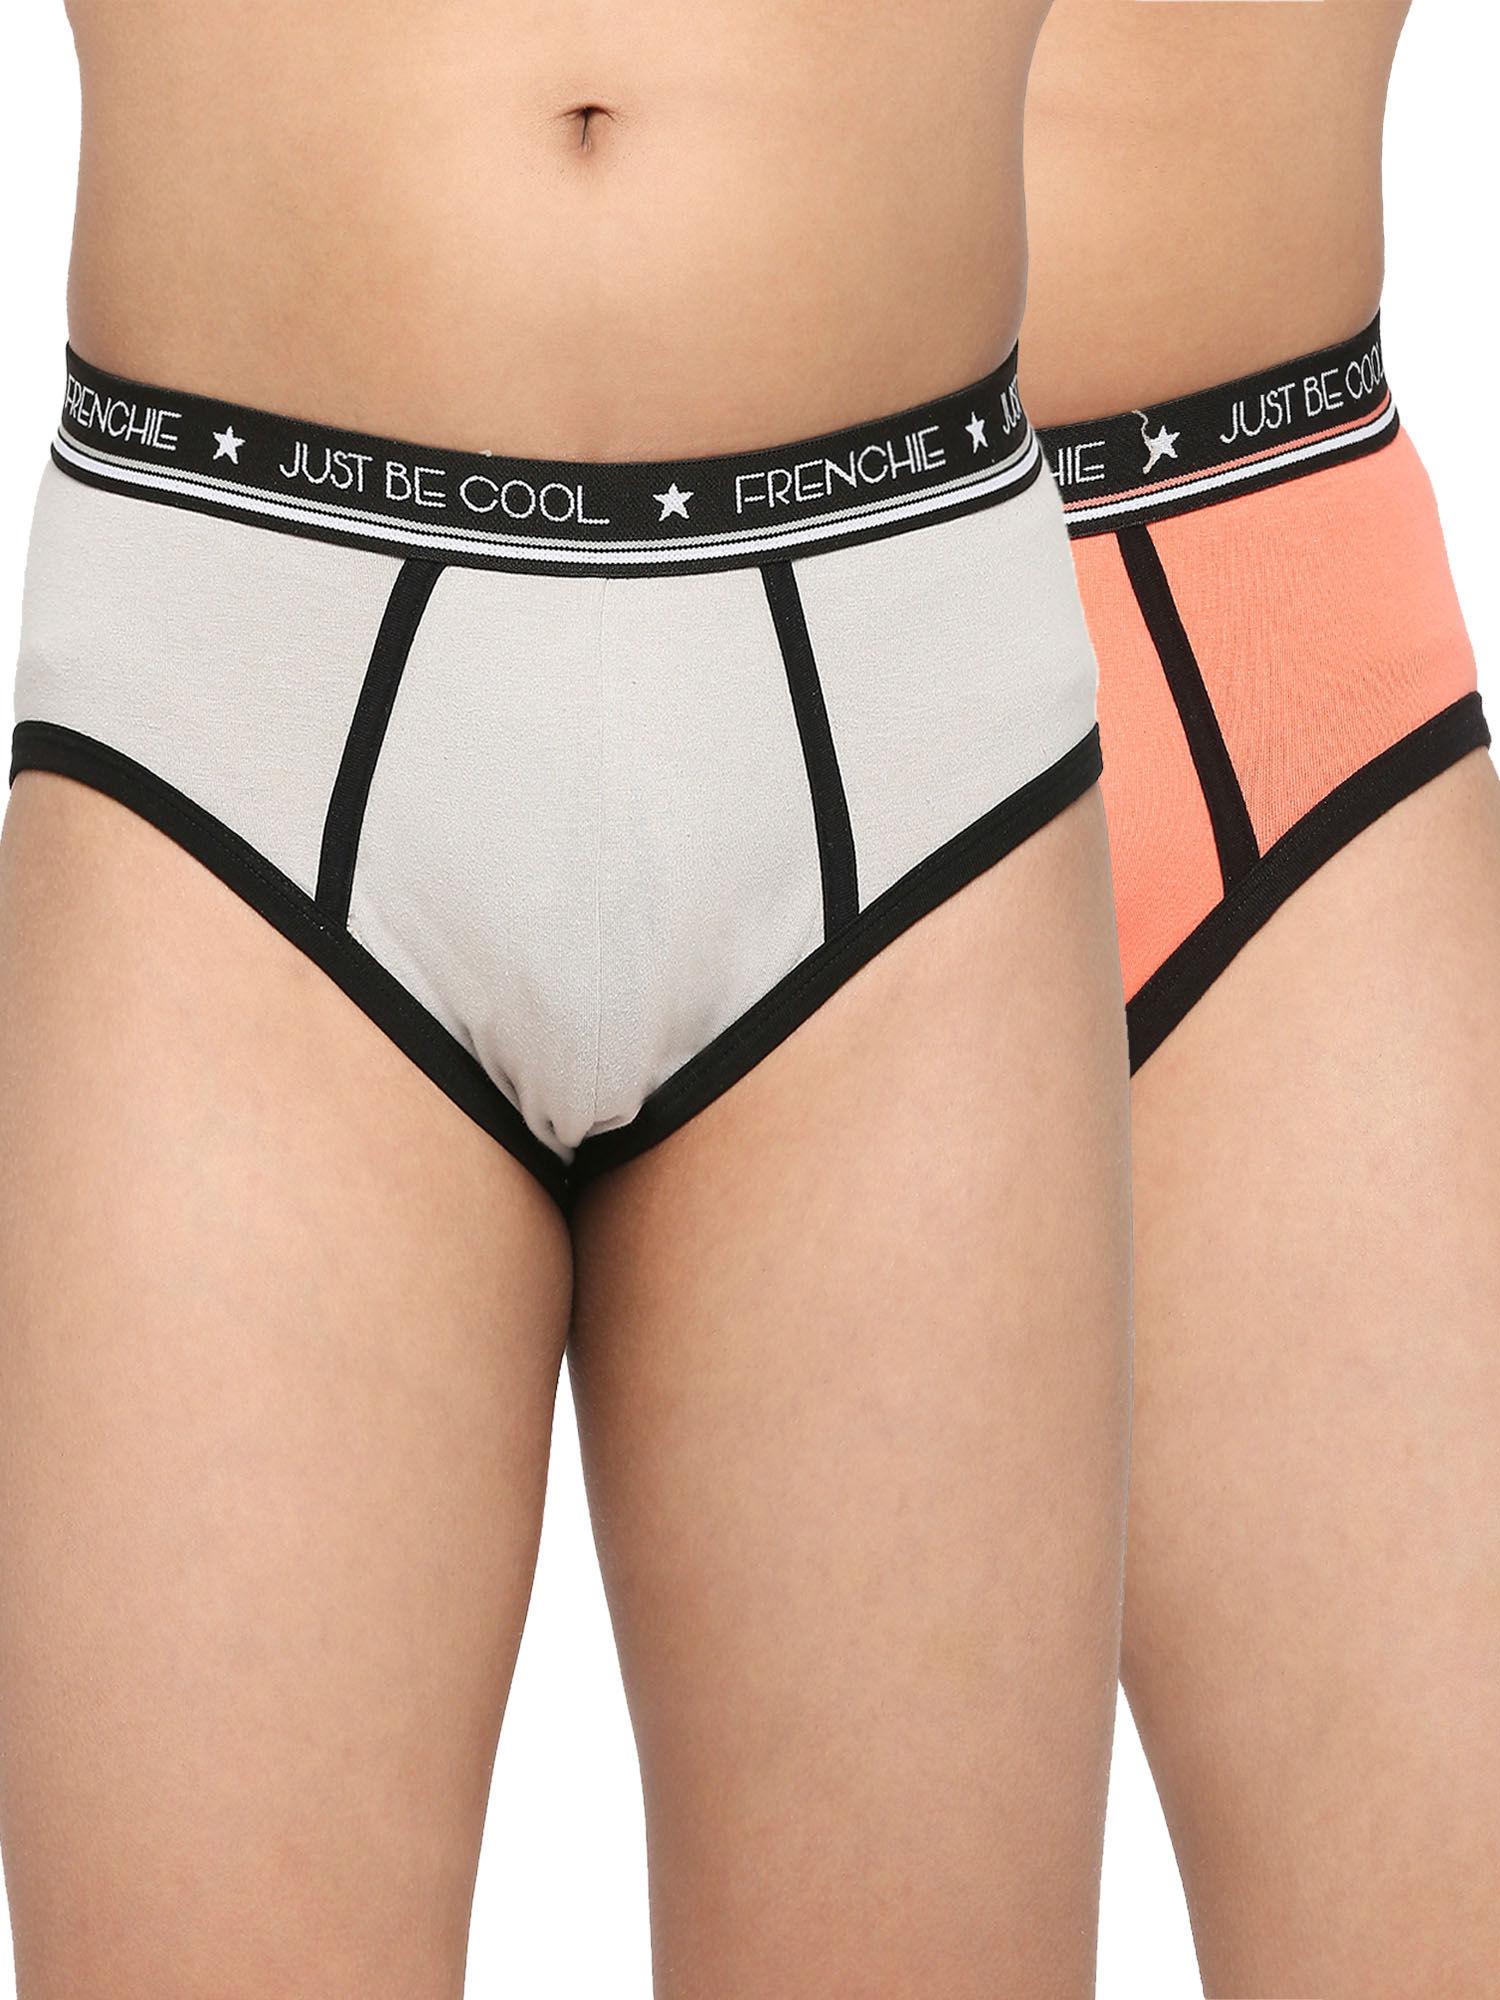 teenagers-cotton-brief-light-grey-and-peach-(pack-of-2)